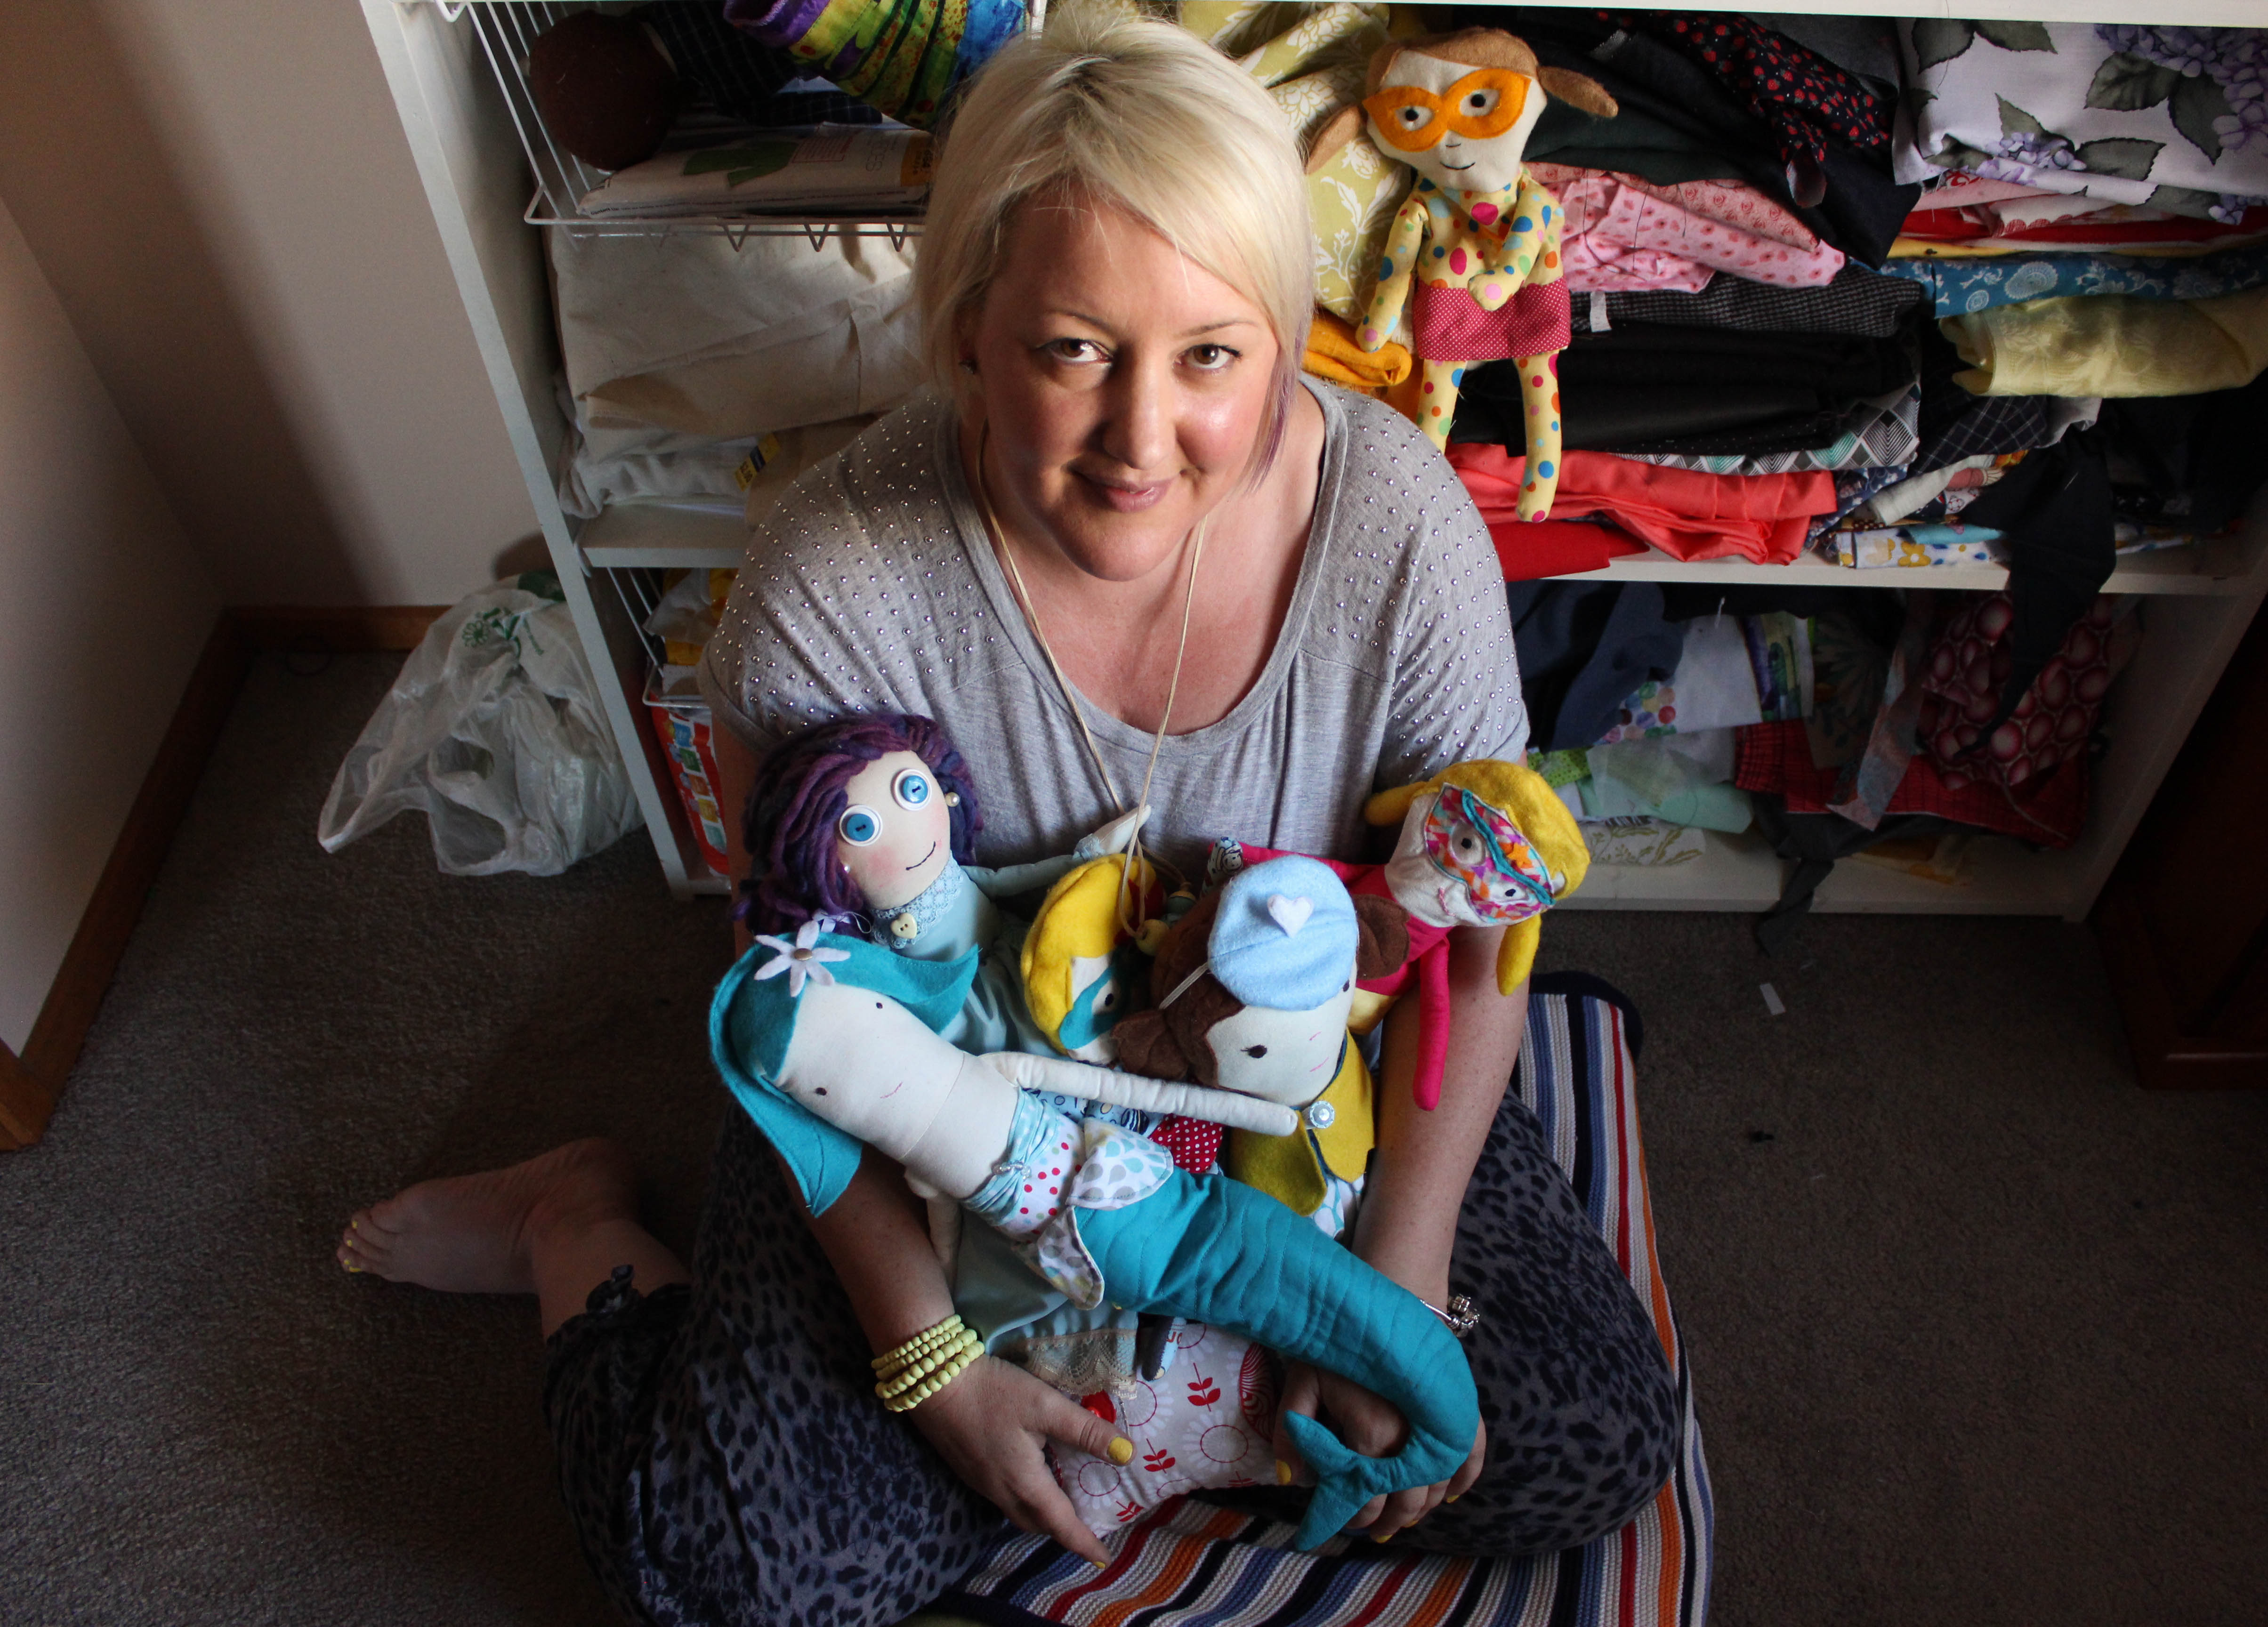 A woman sitting on the floor holding hand-made dolls.